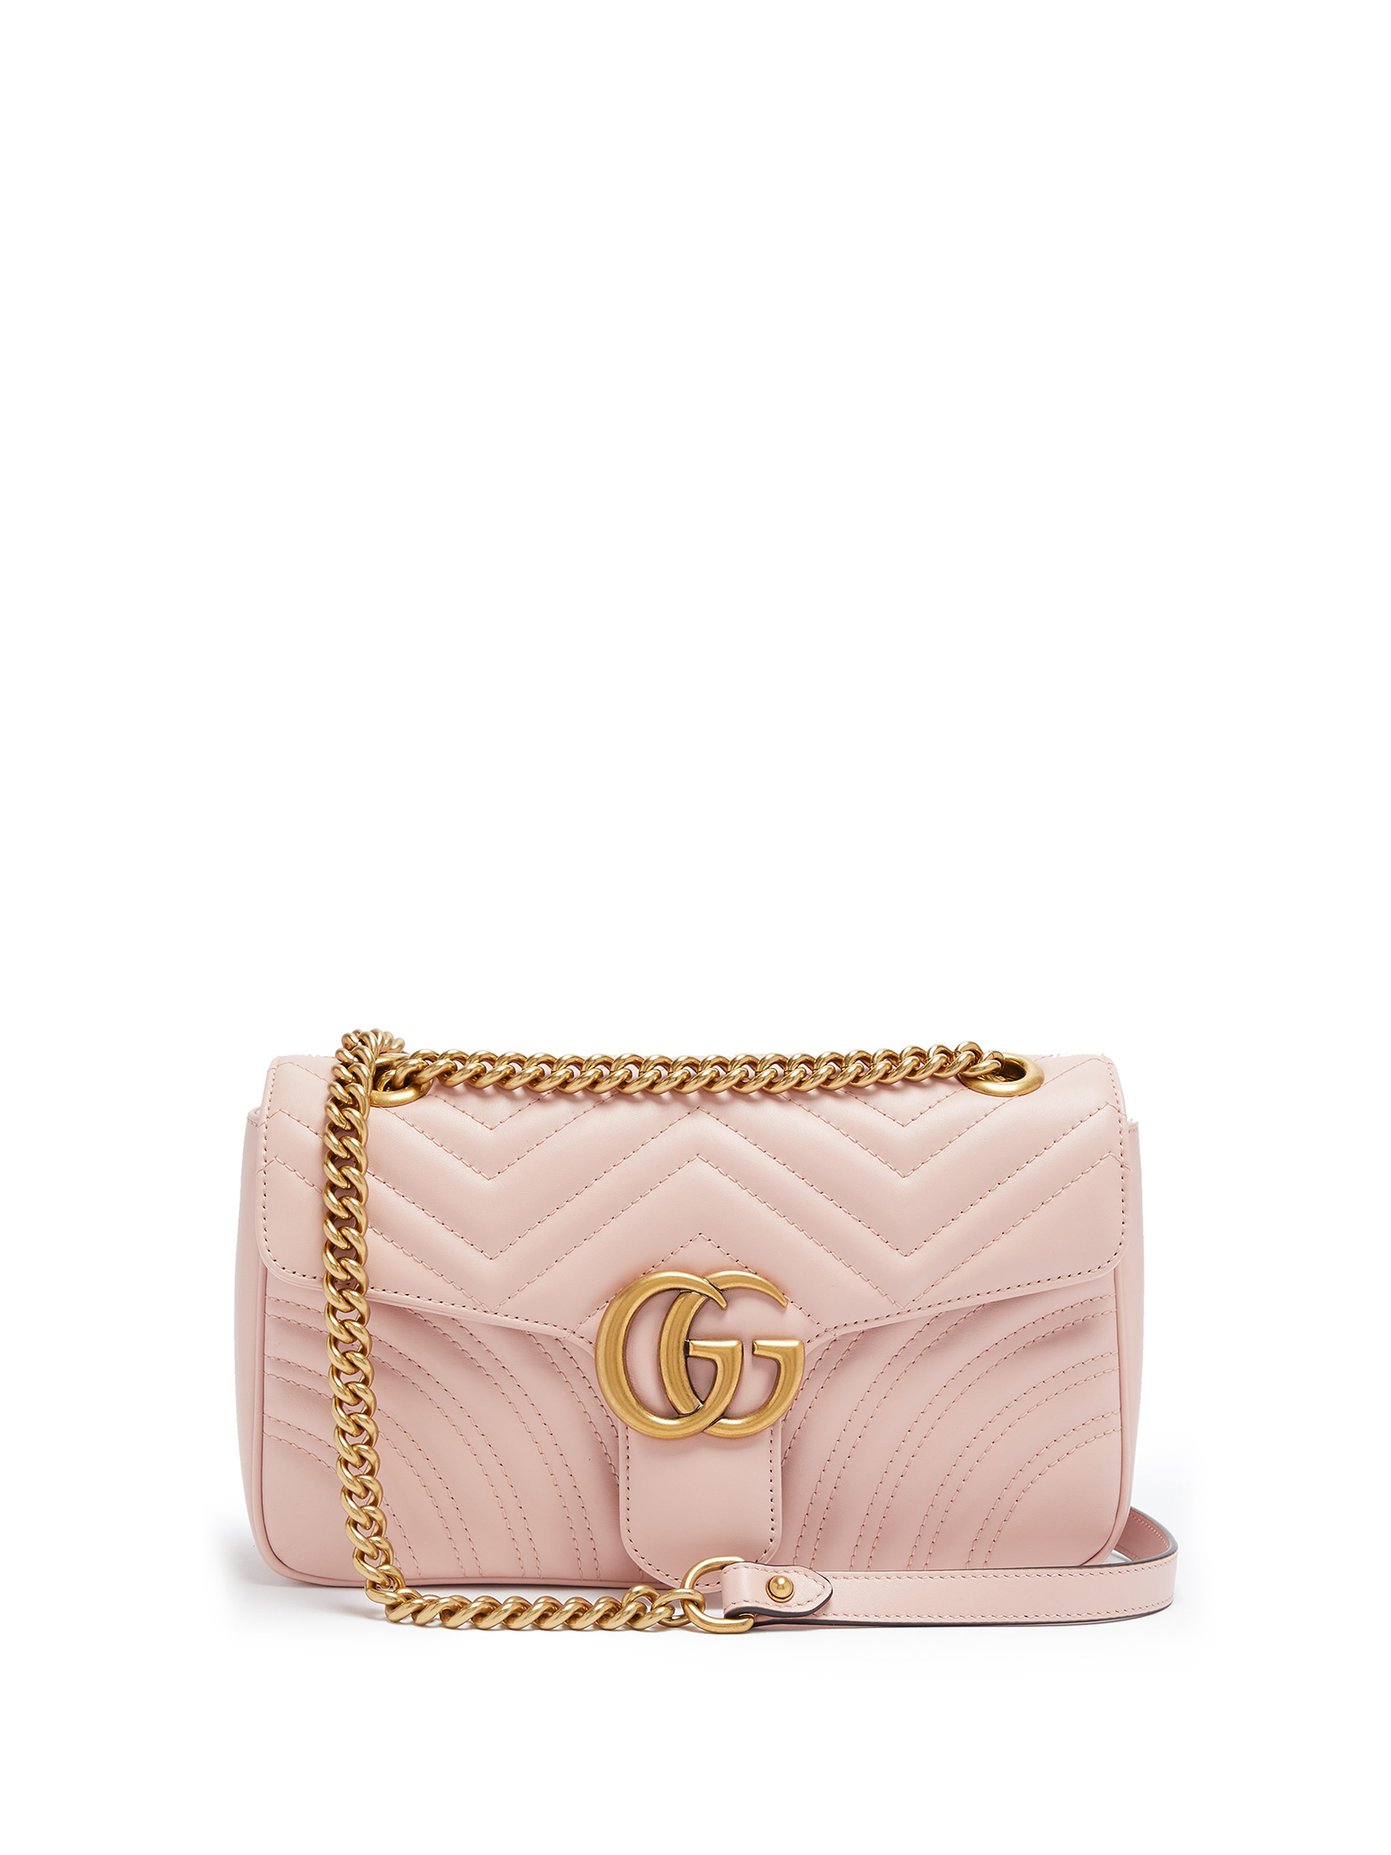 gucci gg marmont small quilted leather shoulder bag